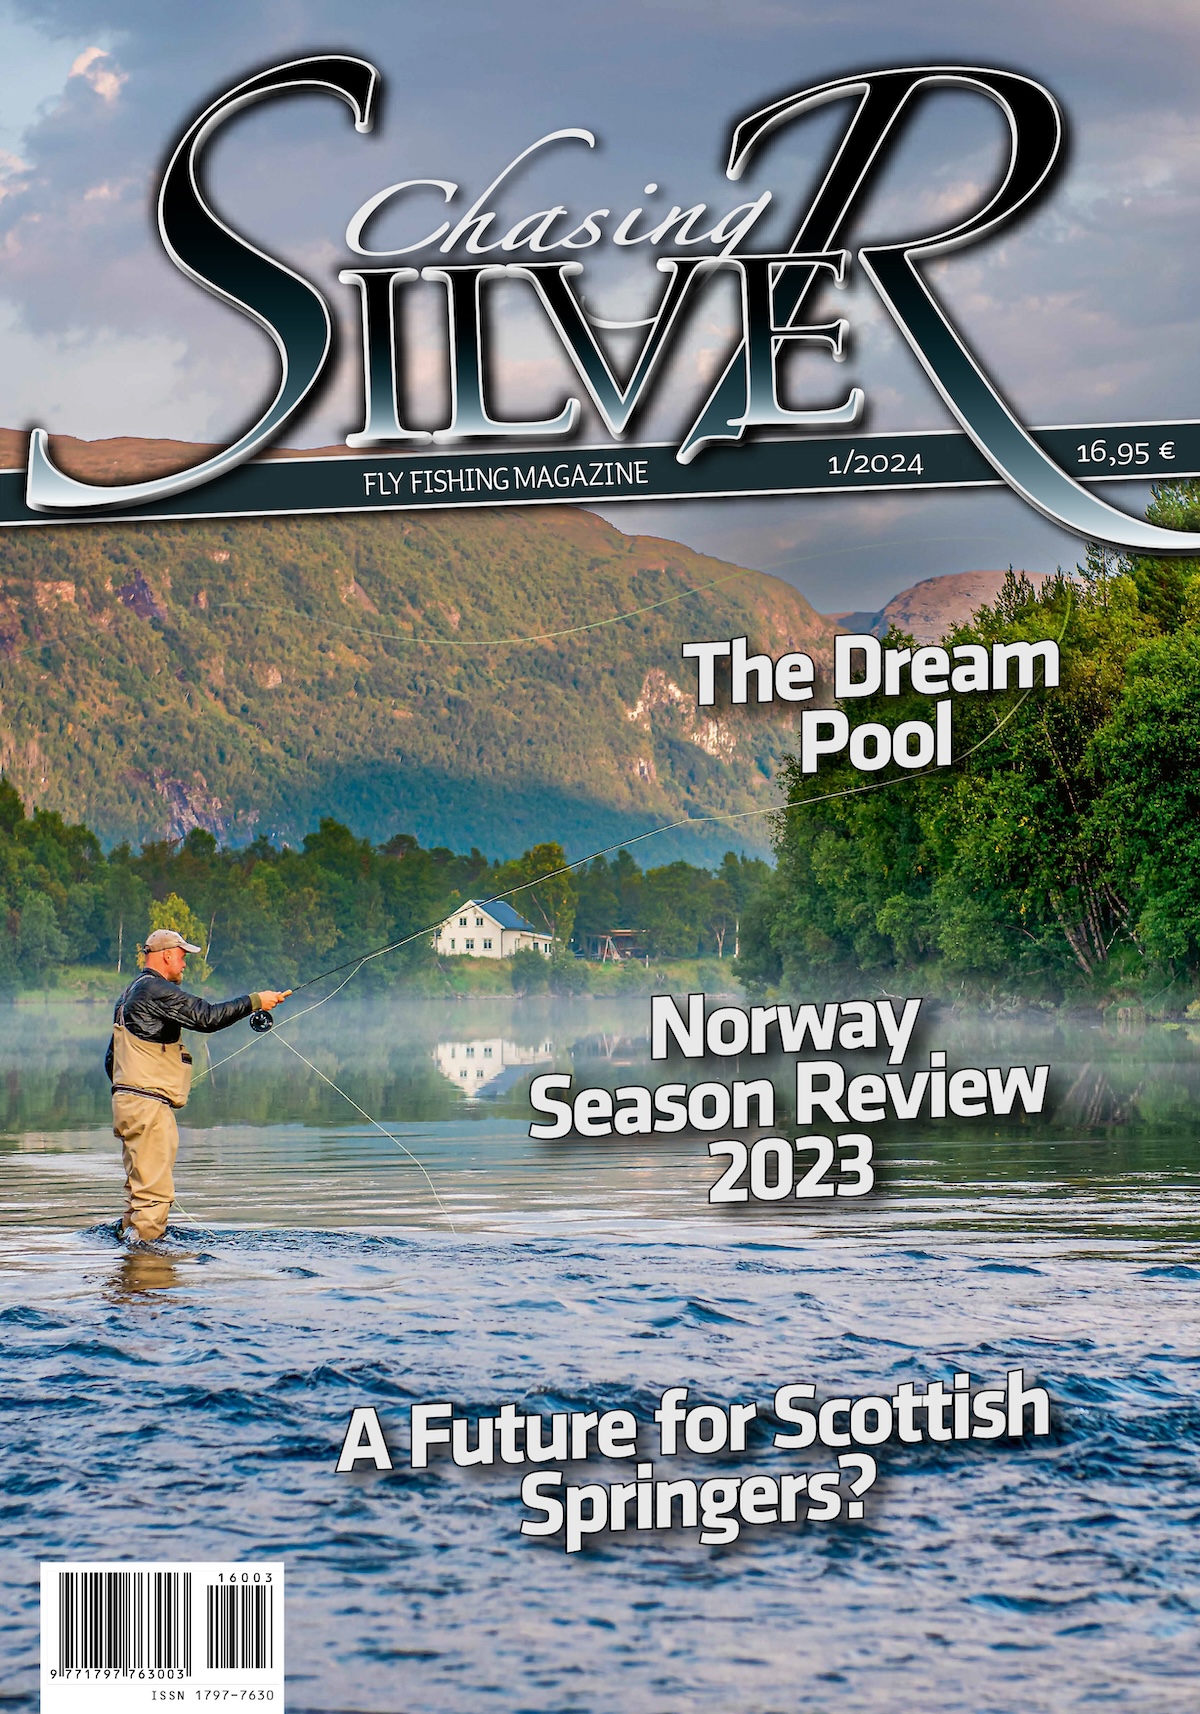 Issue 1 / 2024 – Chasing Silver Fly Fishing Magazine